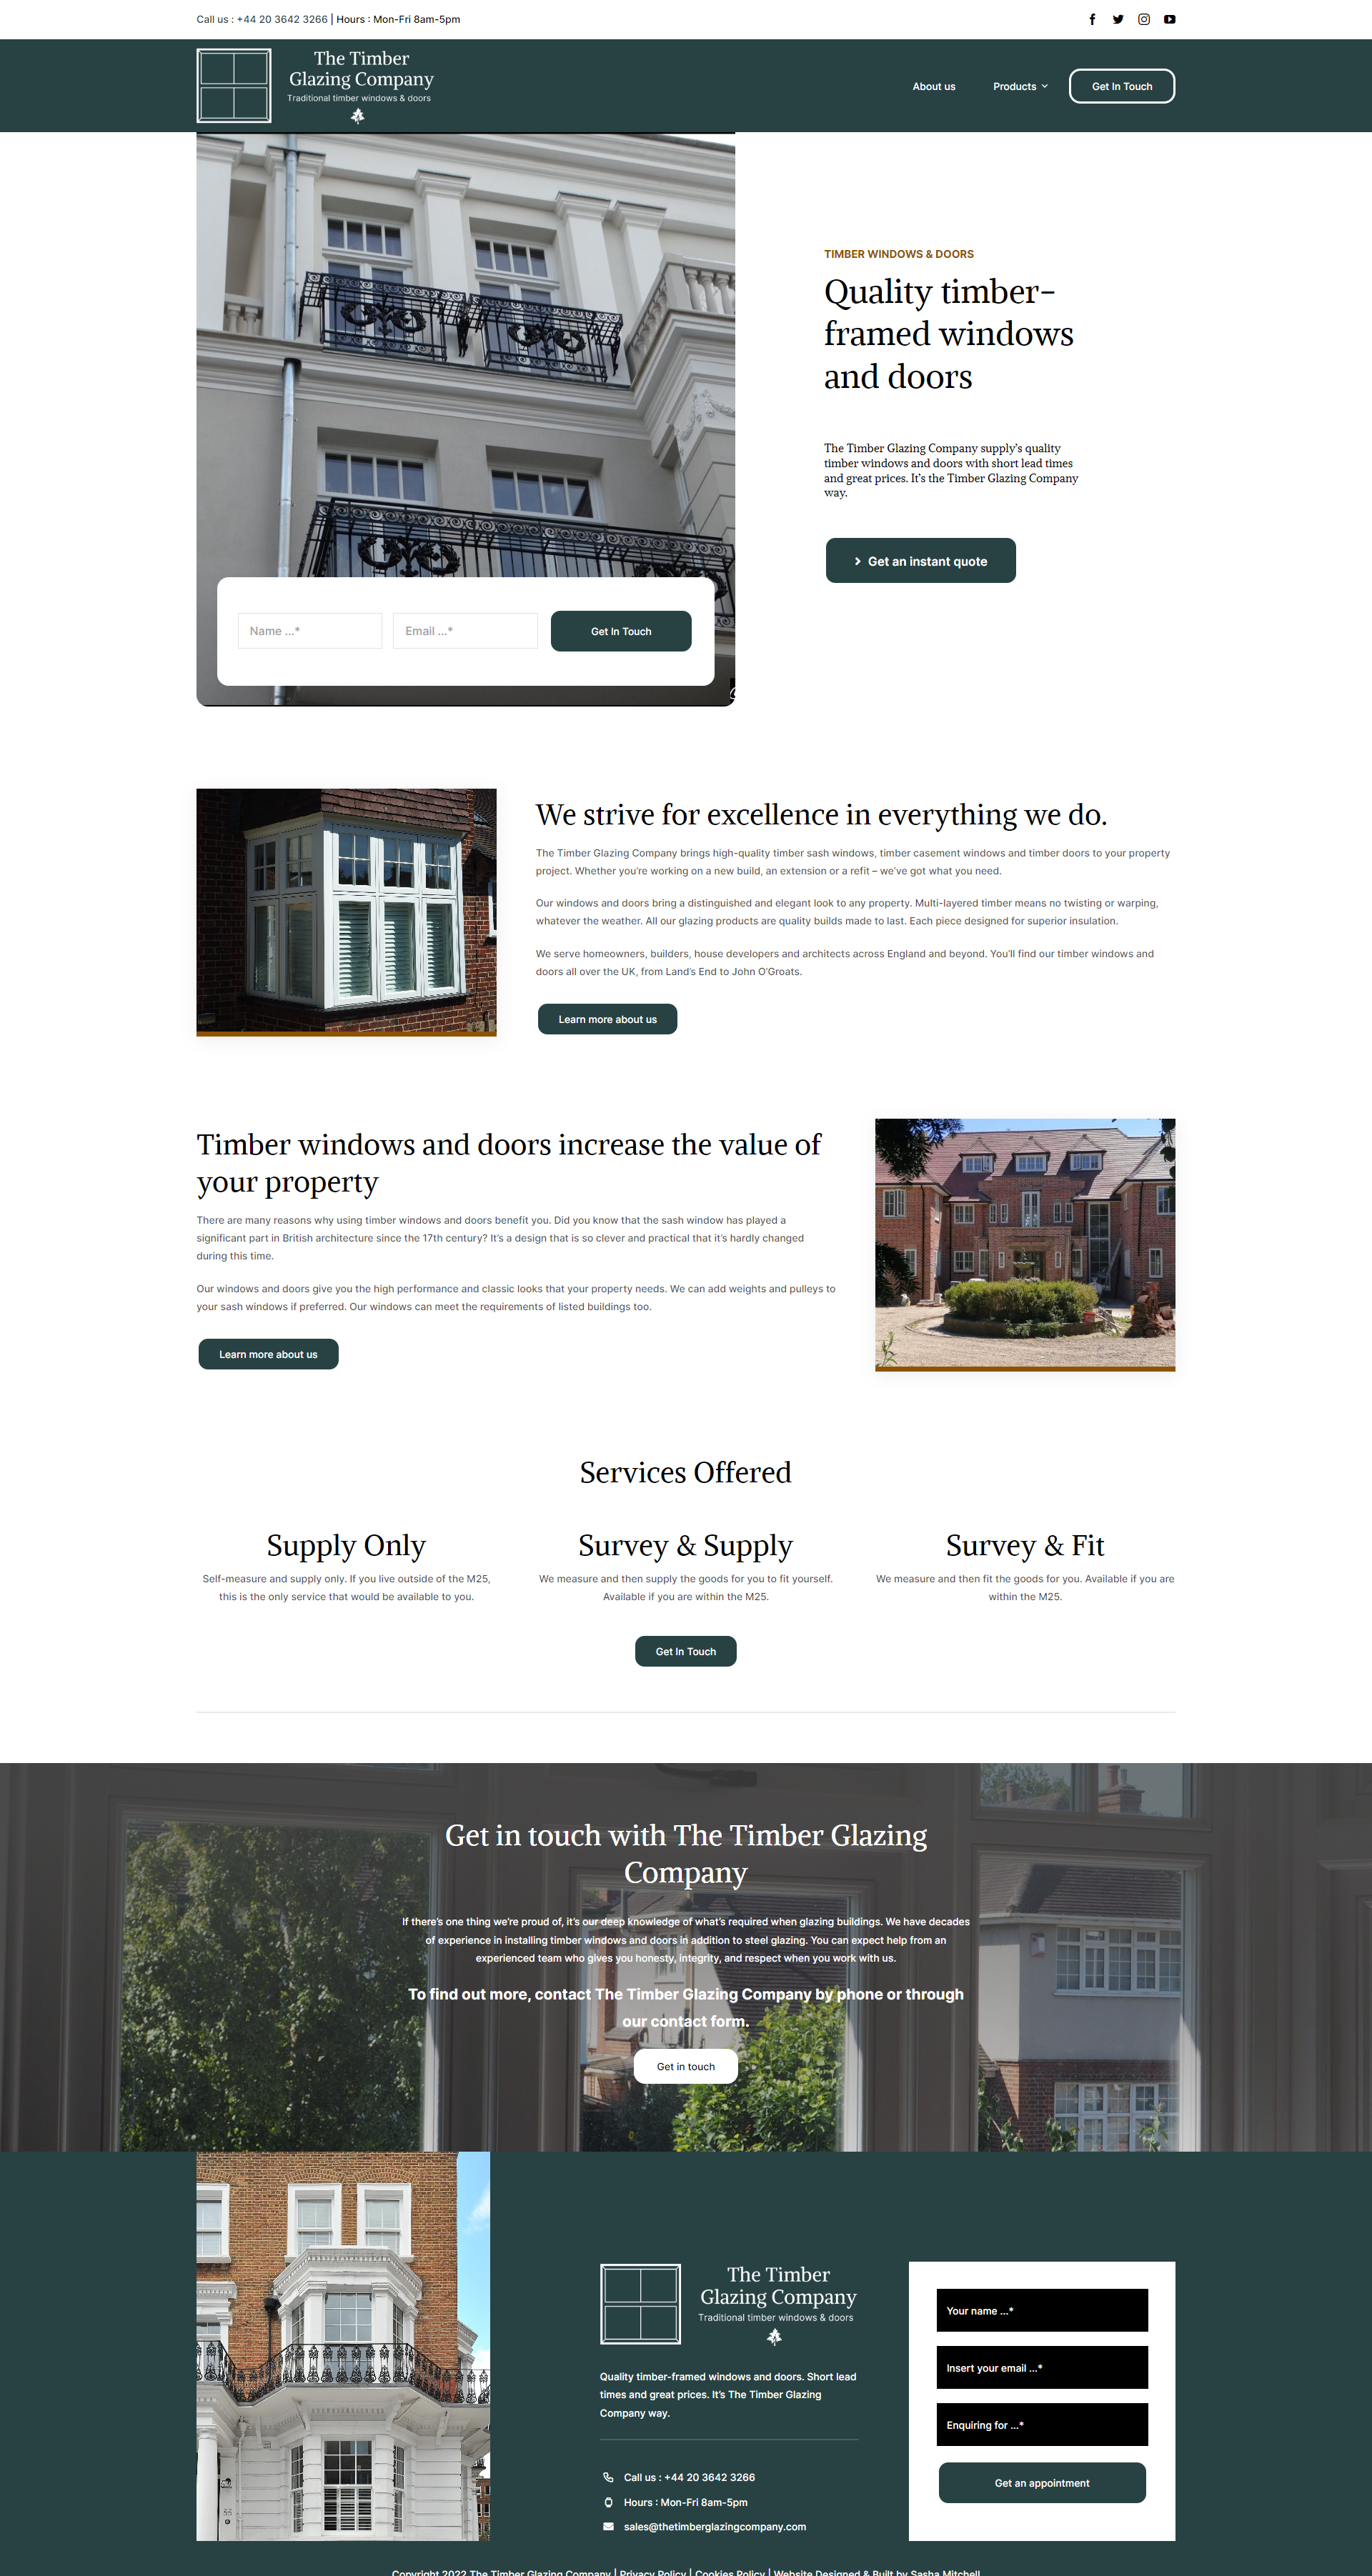 The Timber Glazing Company Case Study Homepage Chell Web & Design